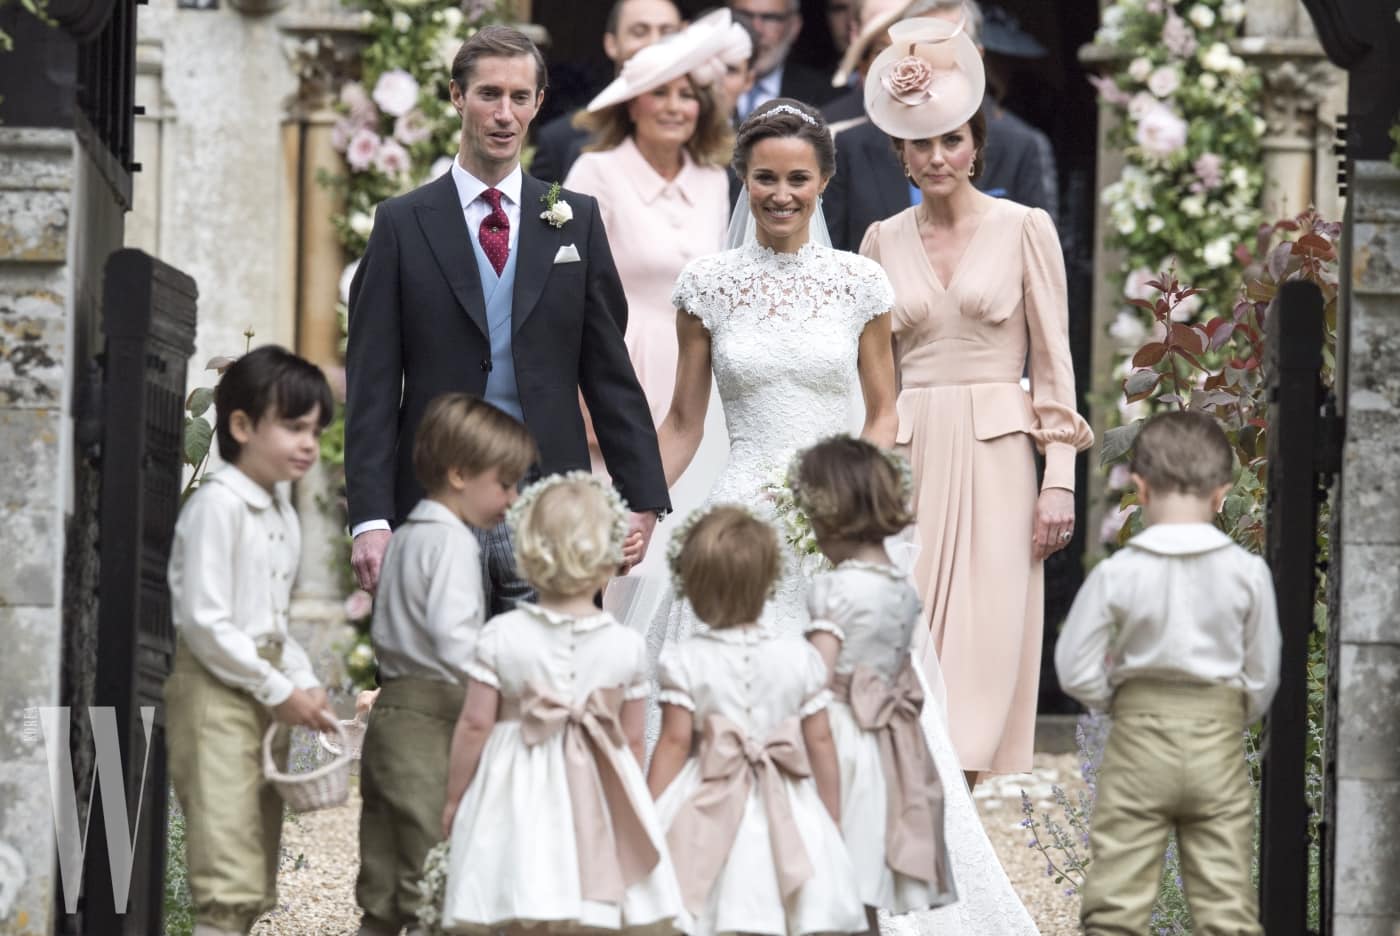 ENGLEFIELD GREEN, ENGLAND - MAY 20: Pippa Middleton and James Matthews smile as they are joined by Catherine, Duchess of Cambridge, right, after their wedding at St Mark's Church onMay 20, 2017 in Englefield, England(Photo by Arthur Edwards - WPA Pool/Getty Images)